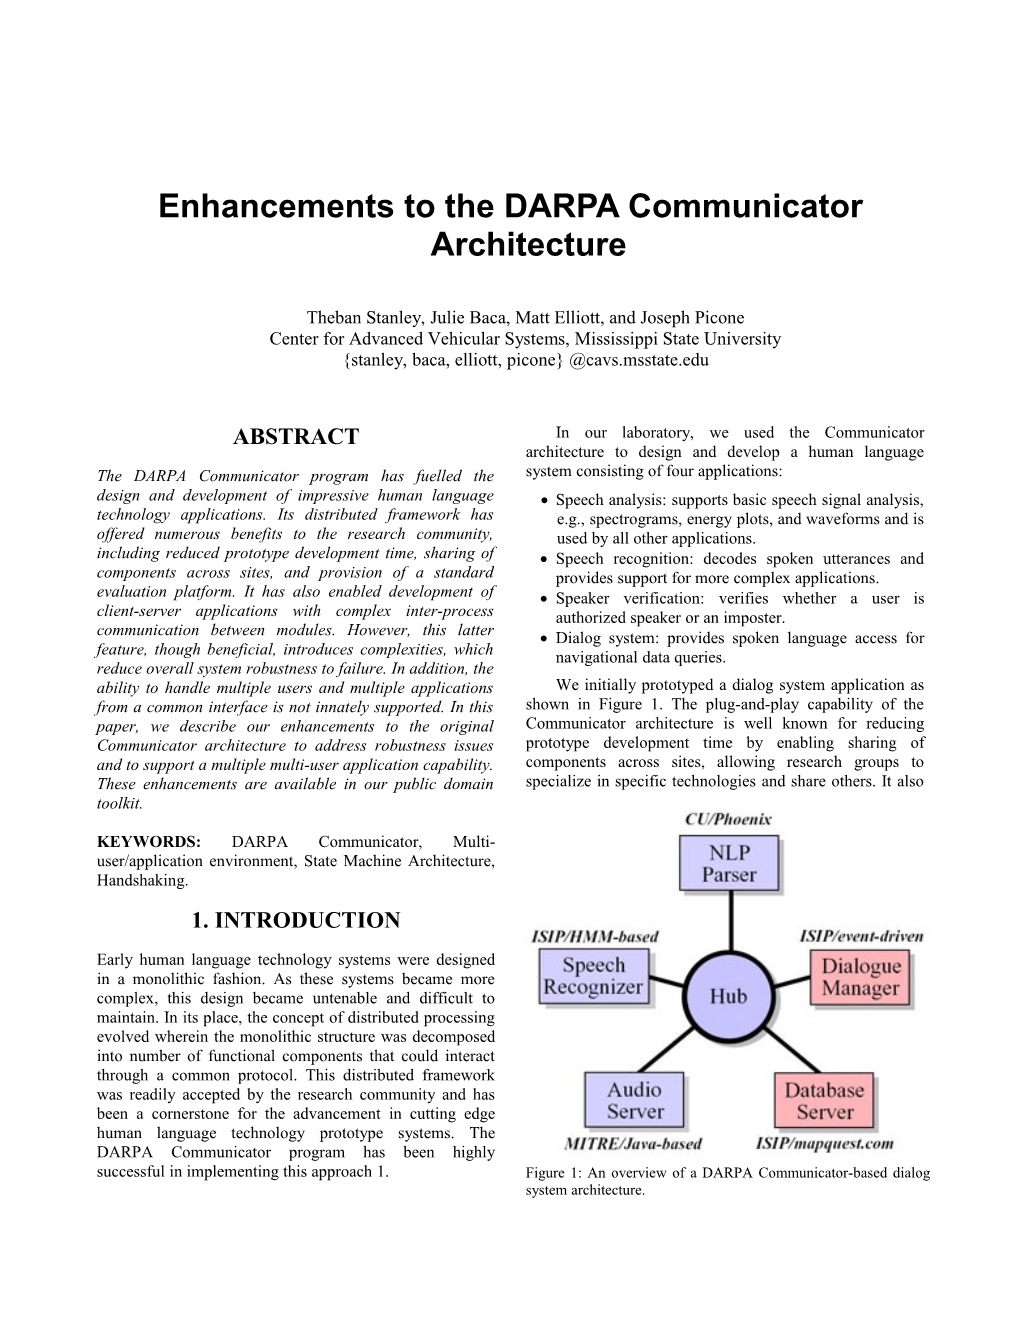 Enhancements to the DARPA Communicator Architecture